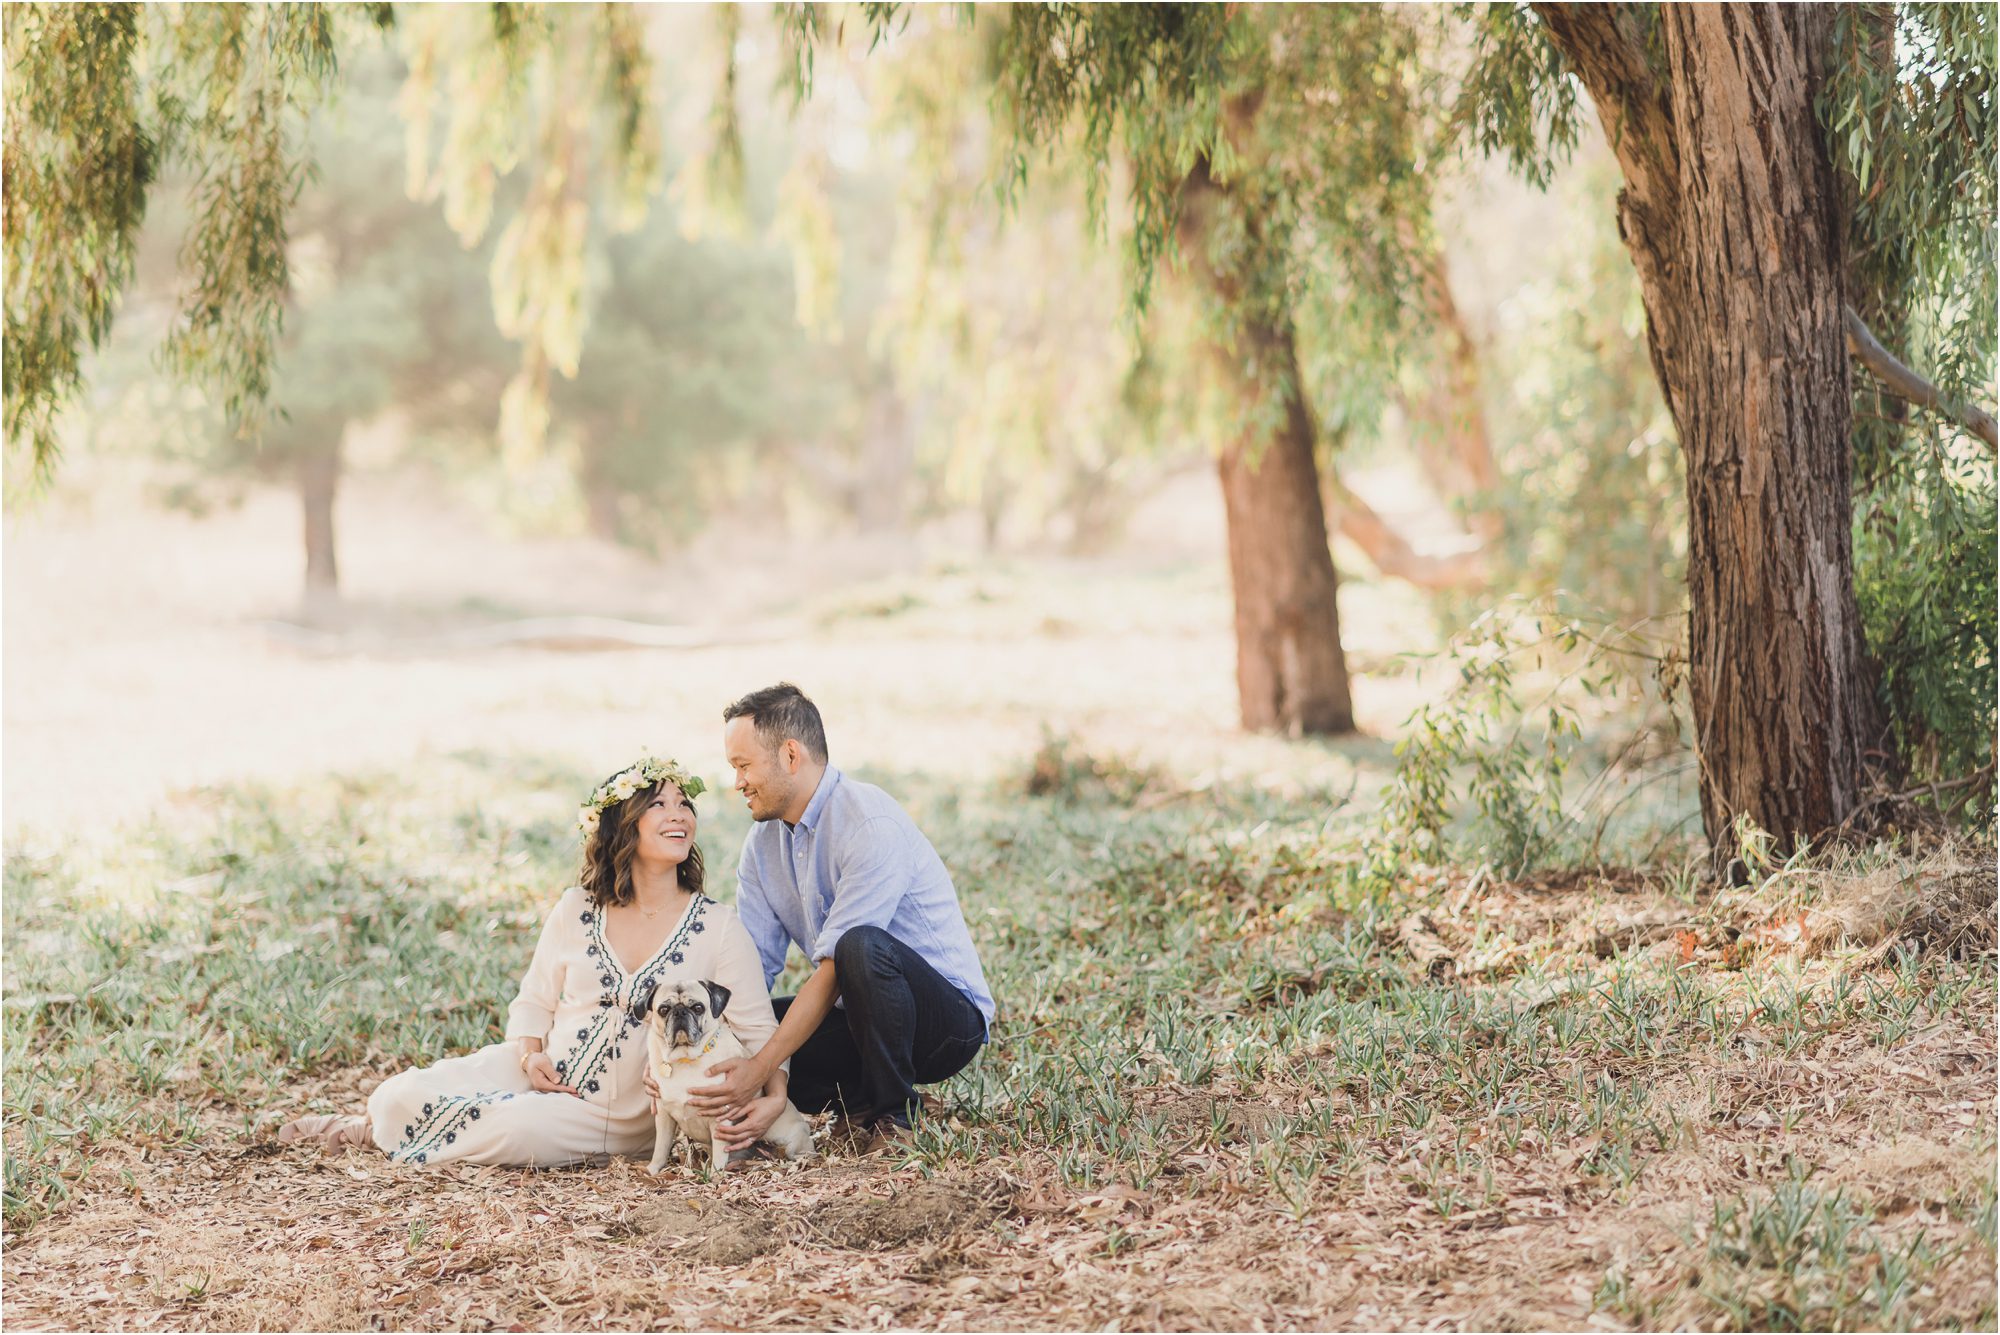 Dreamy Maternity Pictures in Los Angeles 0007